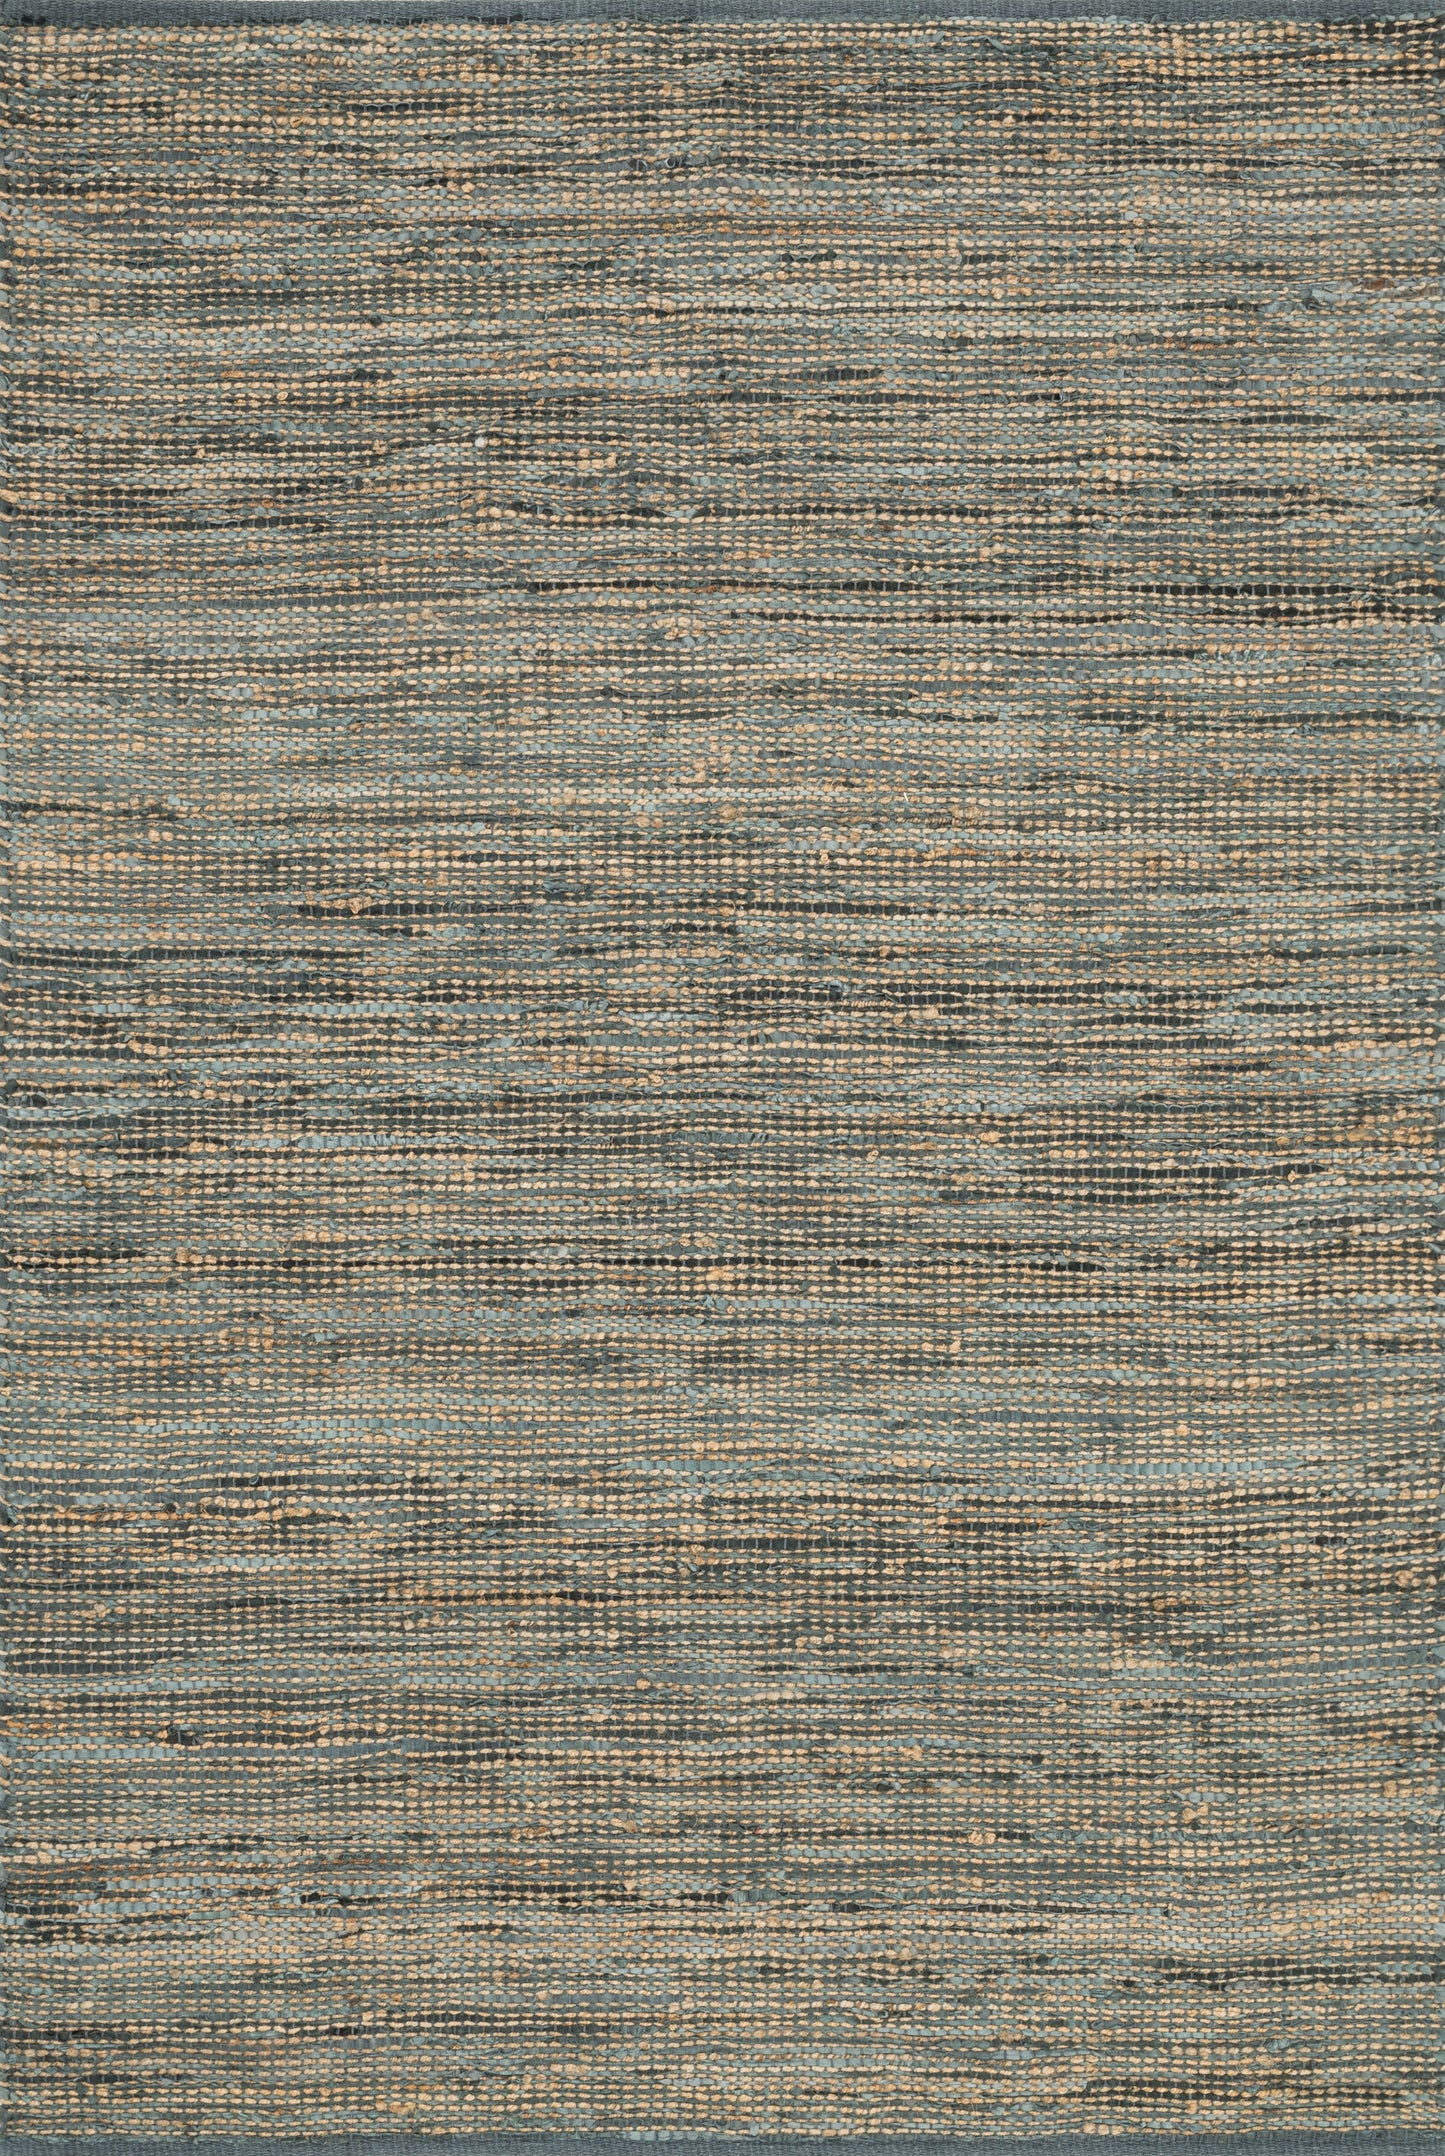 A picture of Loloi's Edge rug, in style ED-01, color Grey